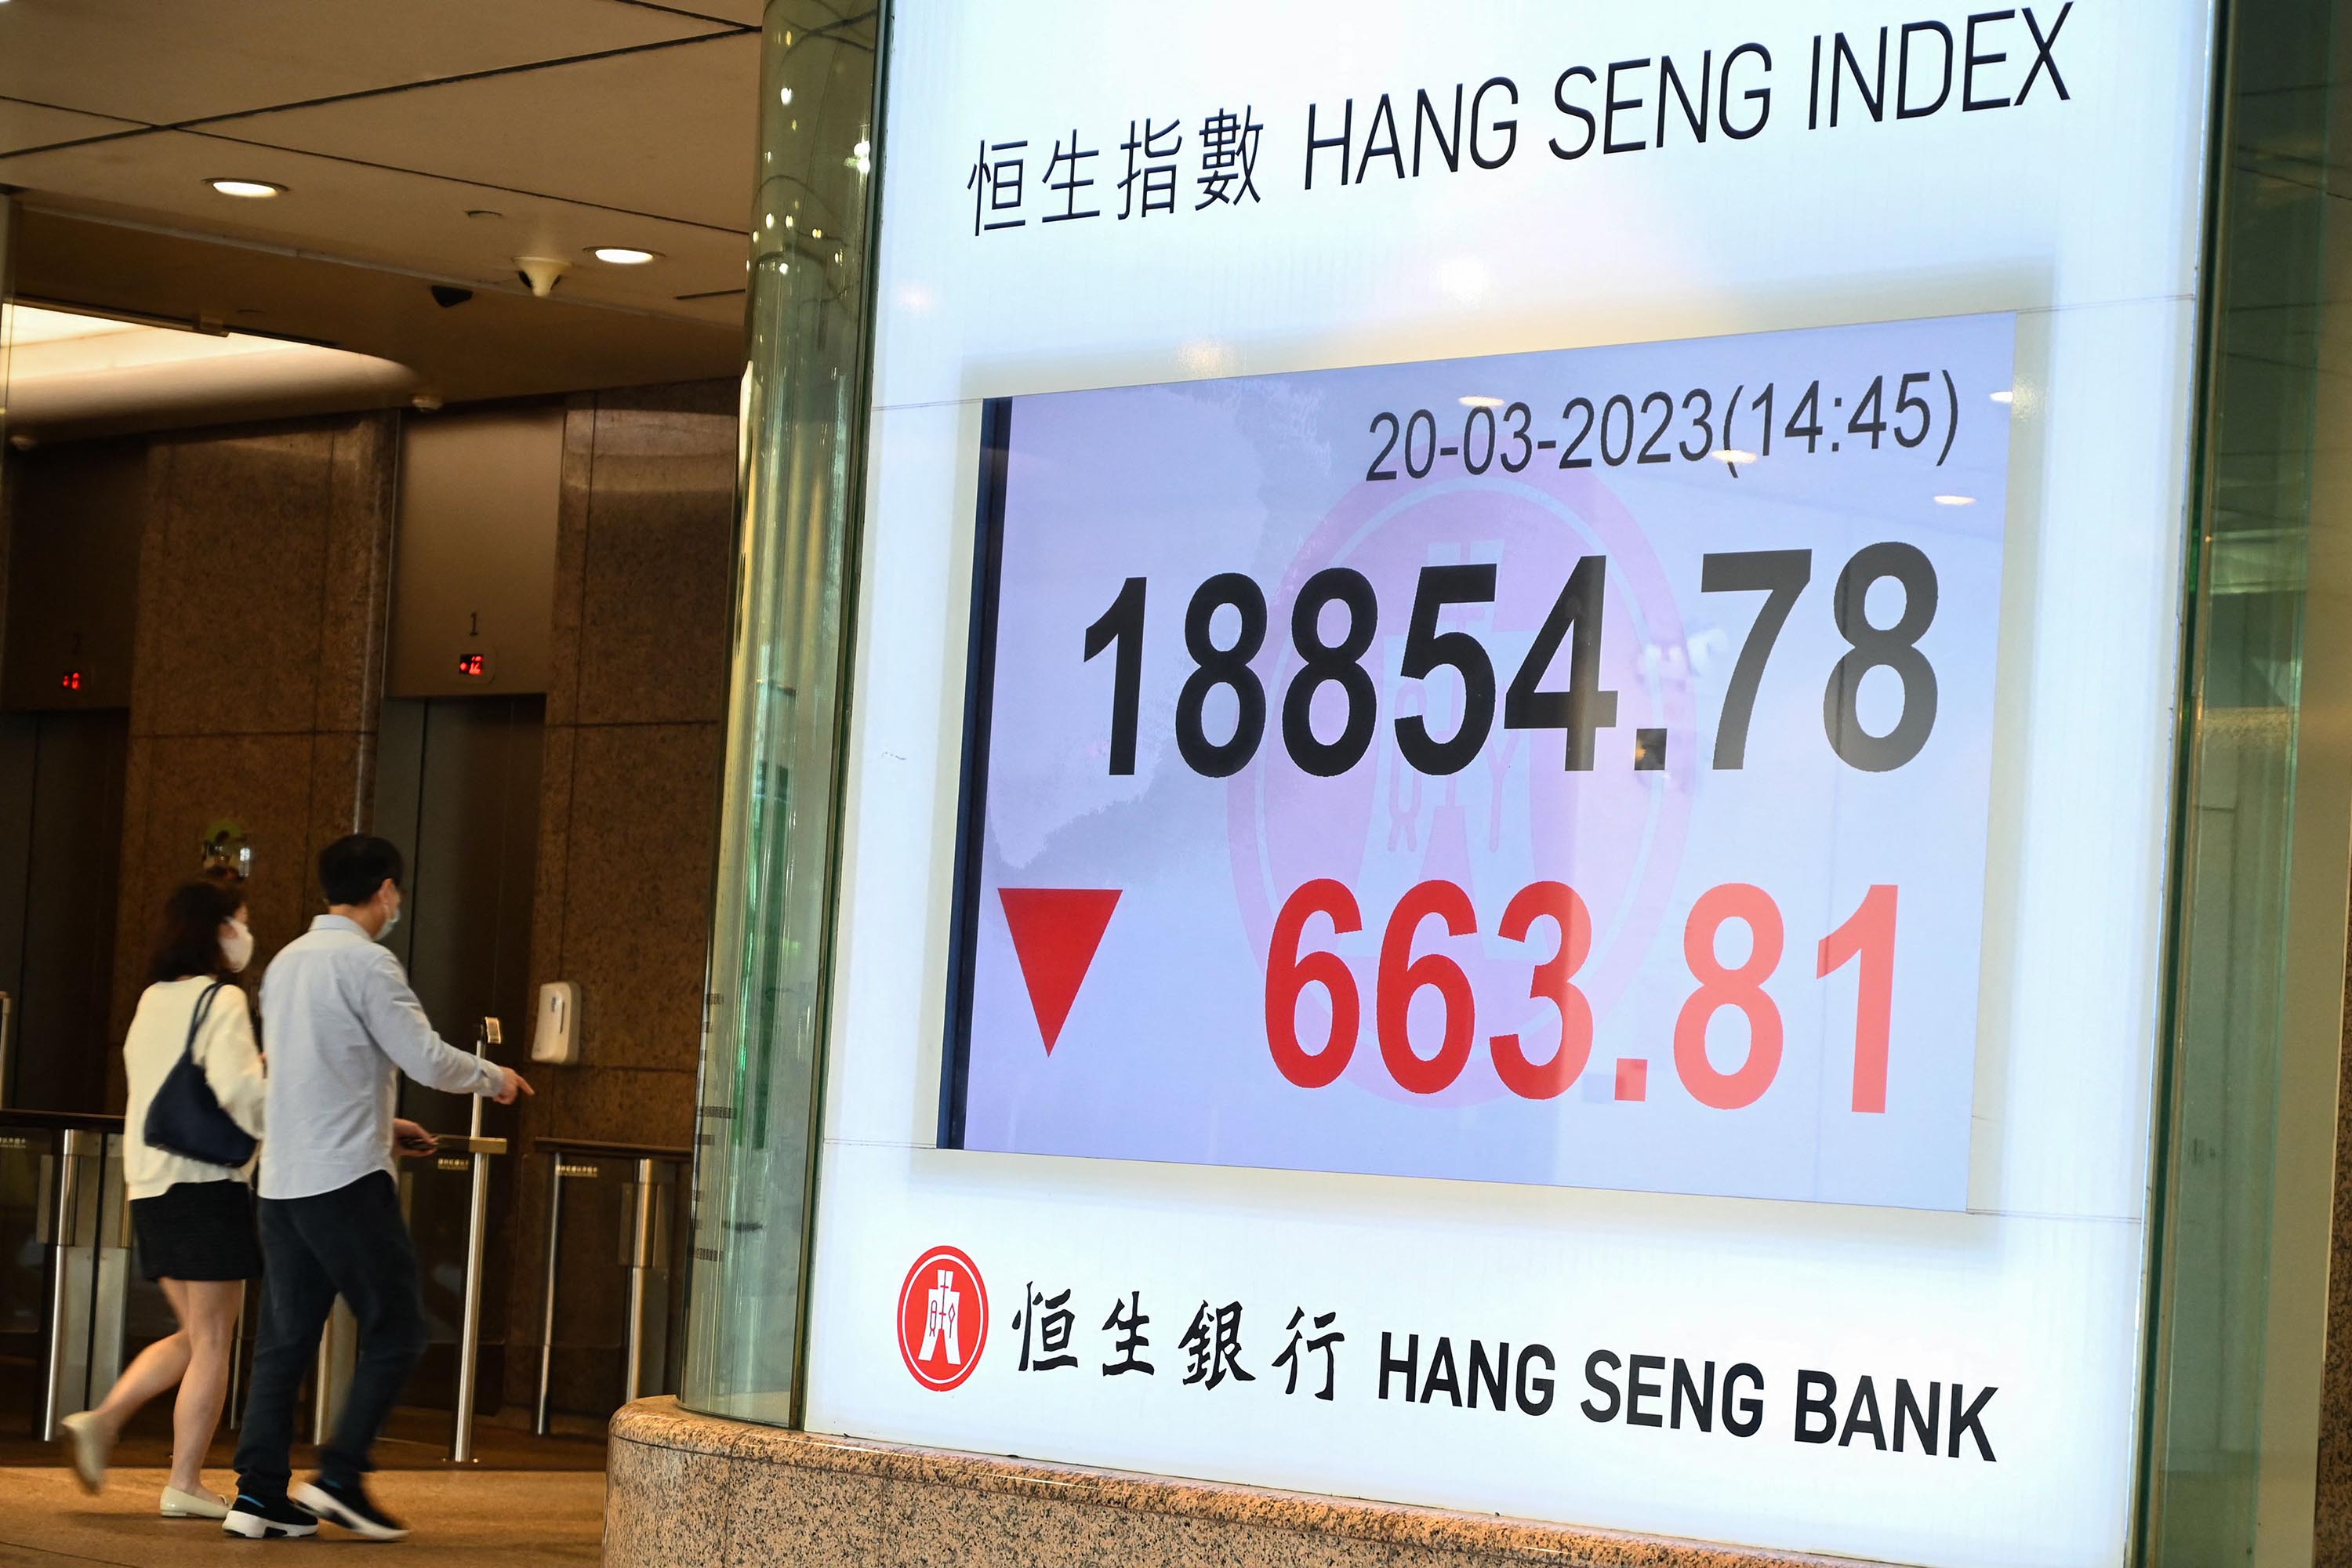 People walk past a sign showing numbers for the Hang Seng Index in Hong Kong on Monday, March 20. 